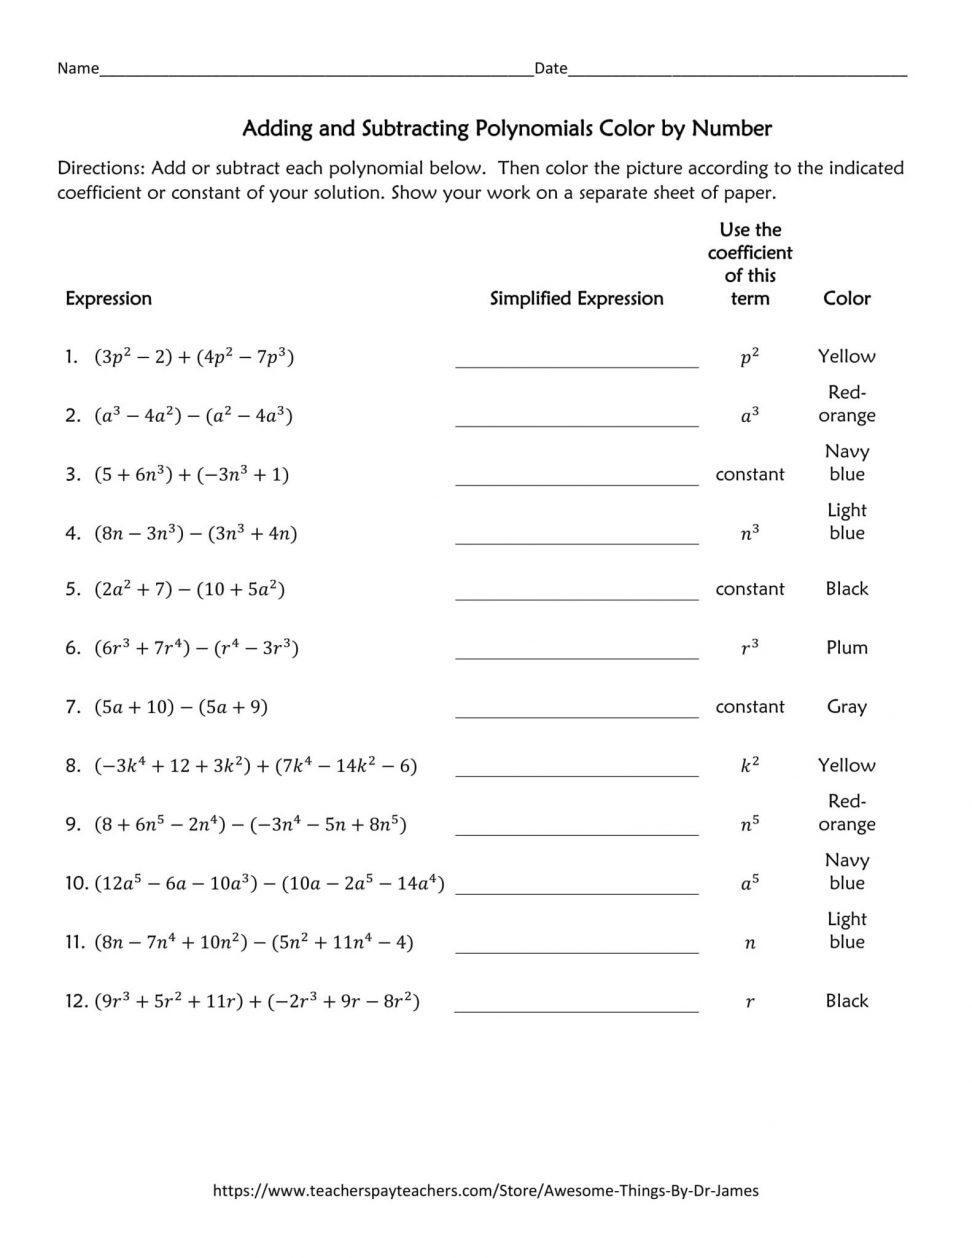 Adding And Subtracting Polynomials Worksheet Db excel